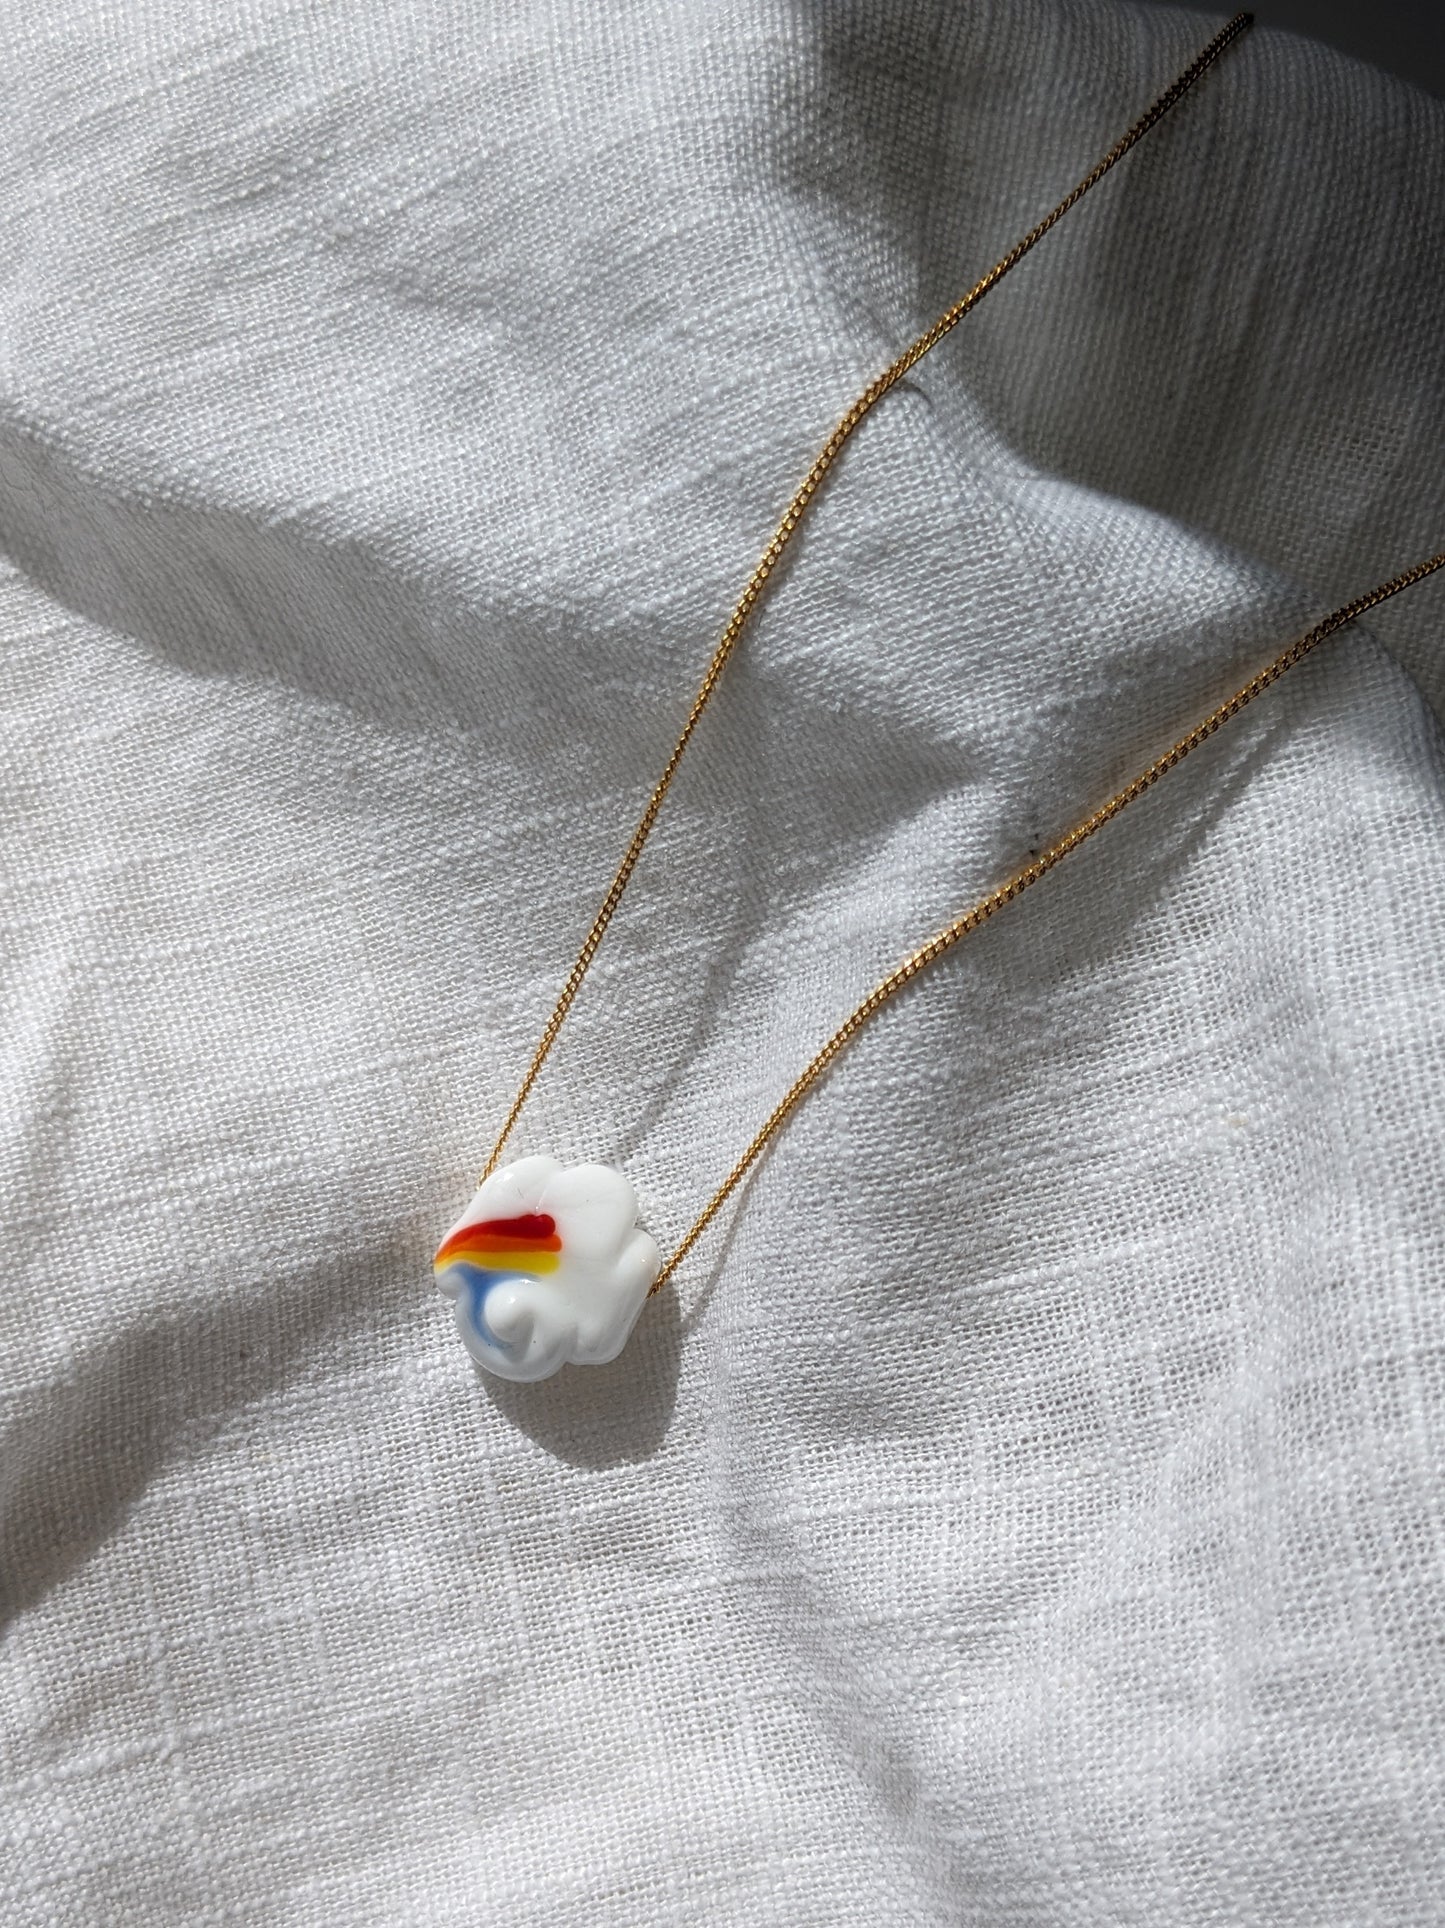 Another World Belfast Rainbow Cloud Collab necklace